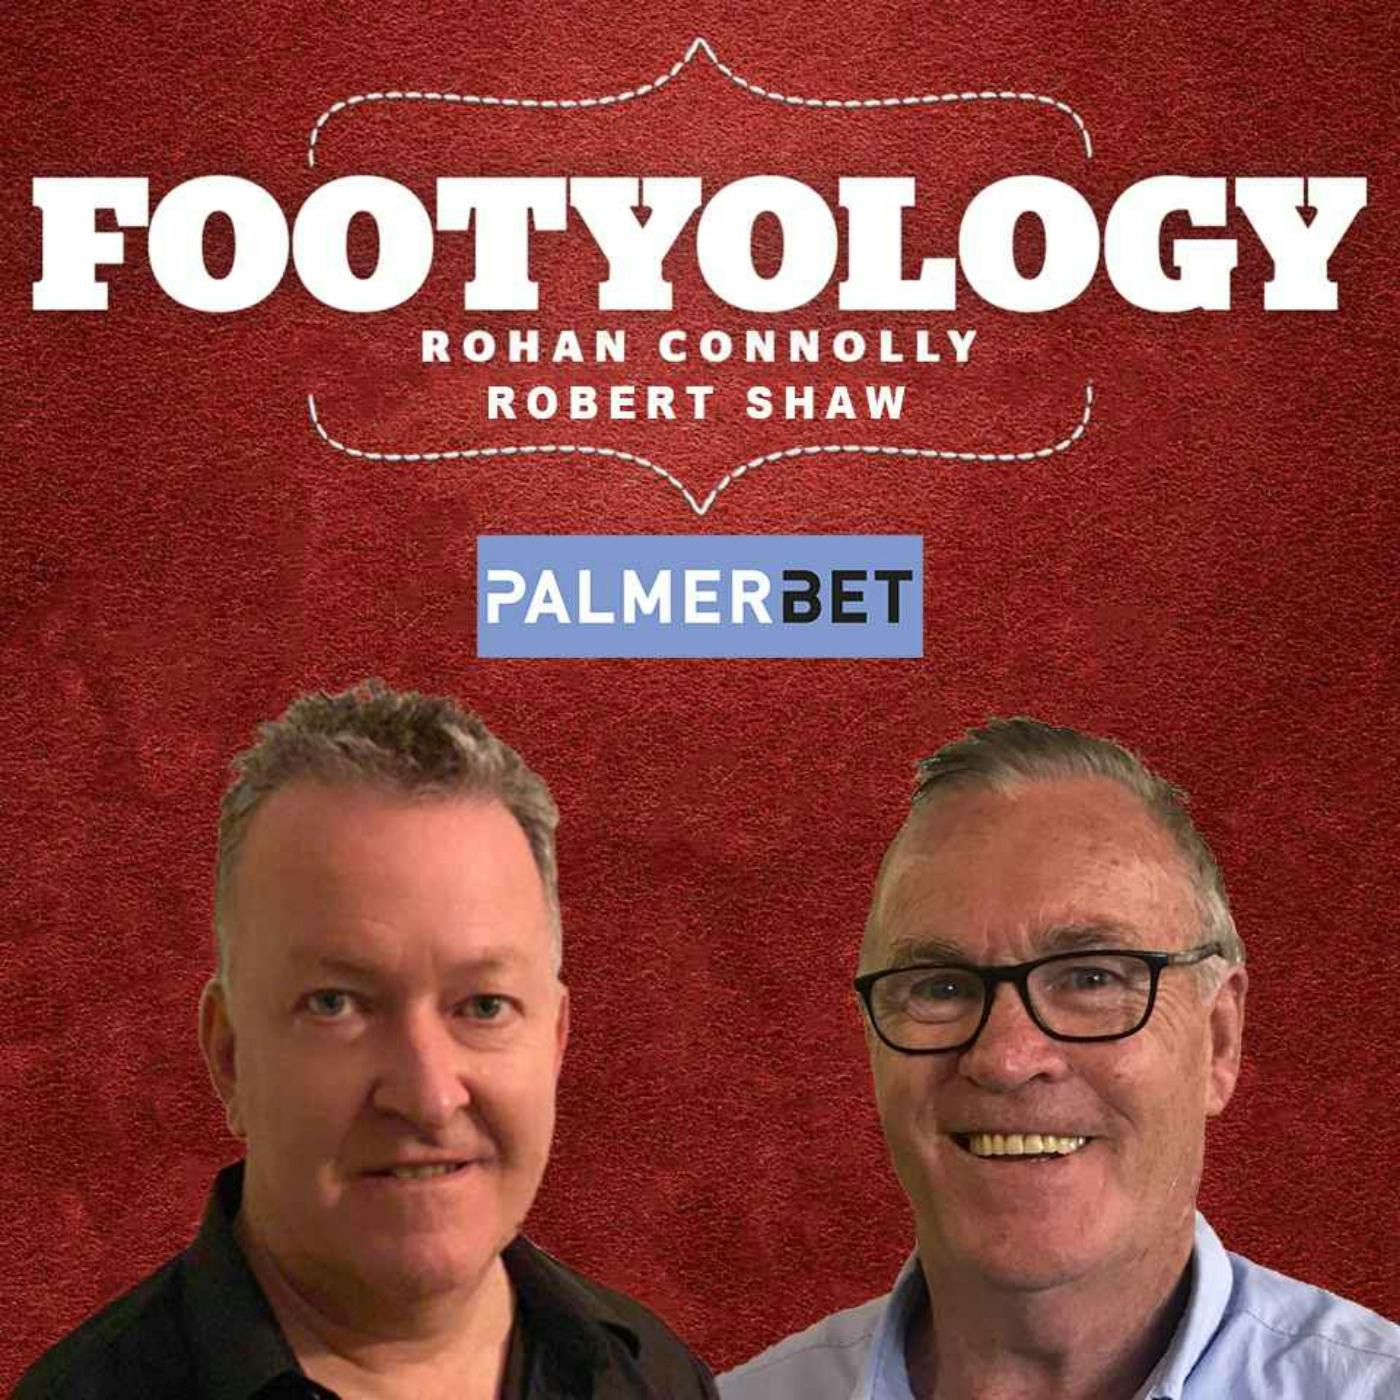 Footyology Podcast - June 29th 2022